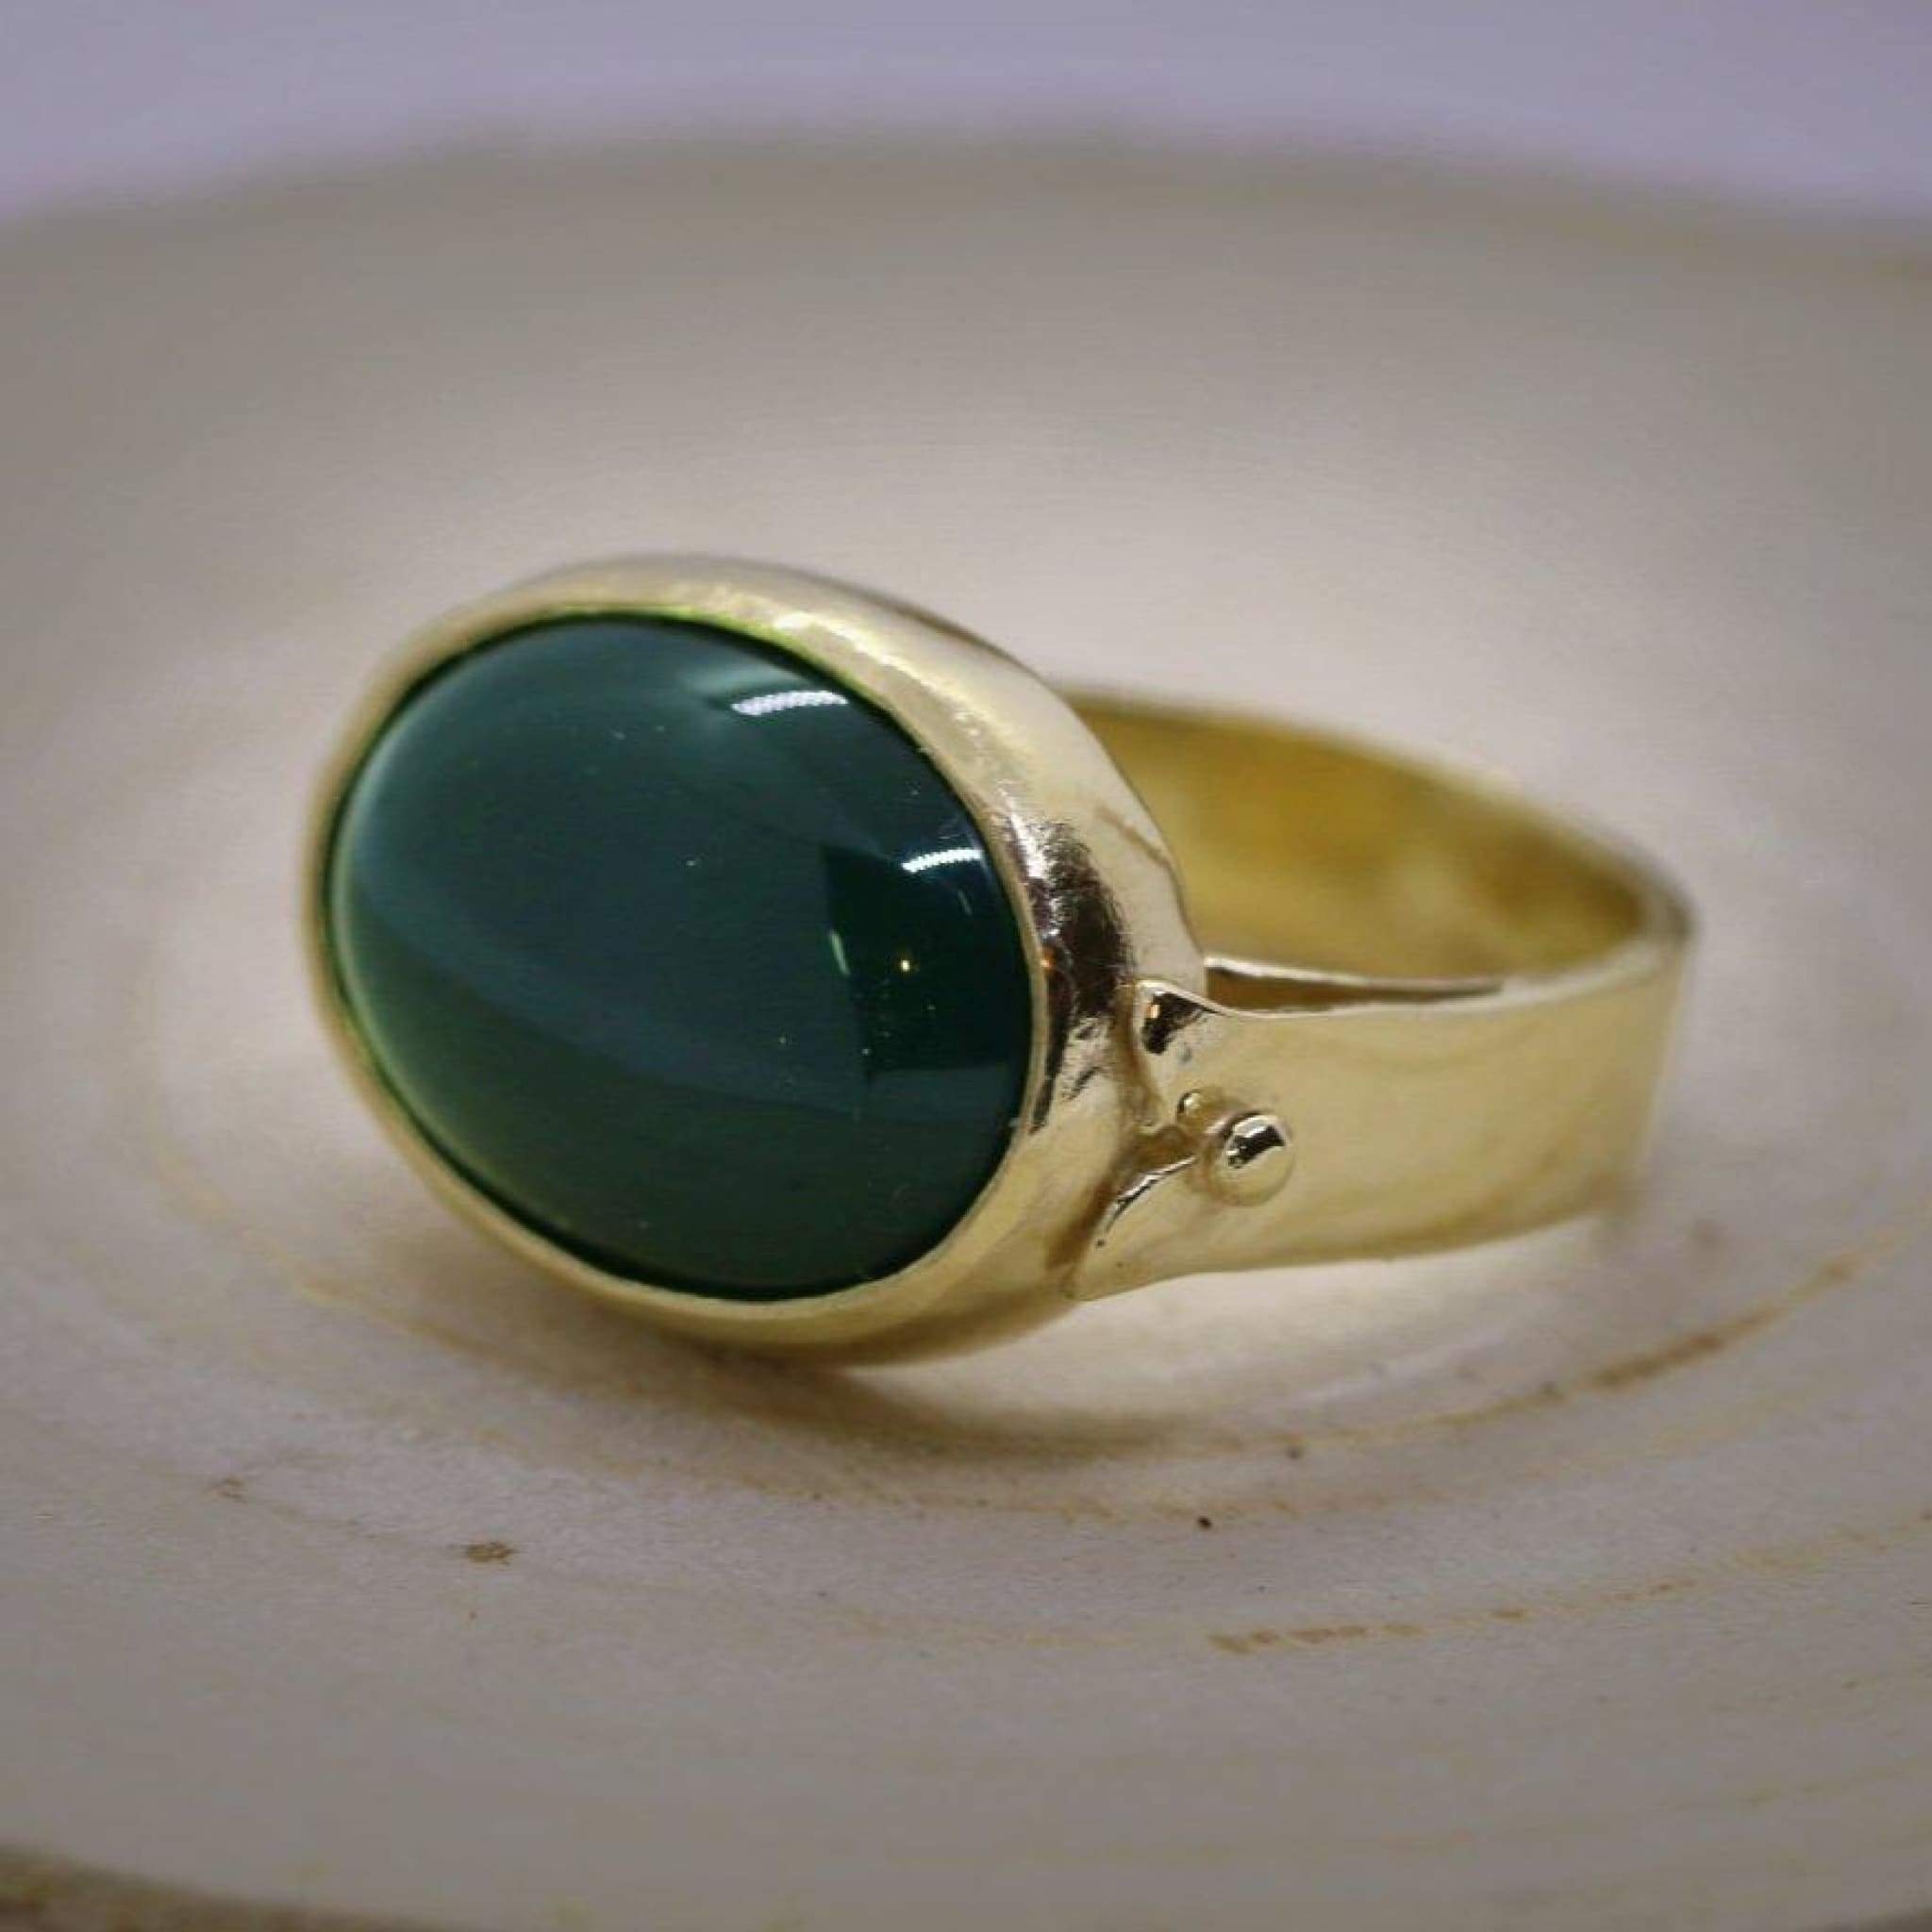 14K Gold Filled Ring With Green Onyx Gemstone Rings